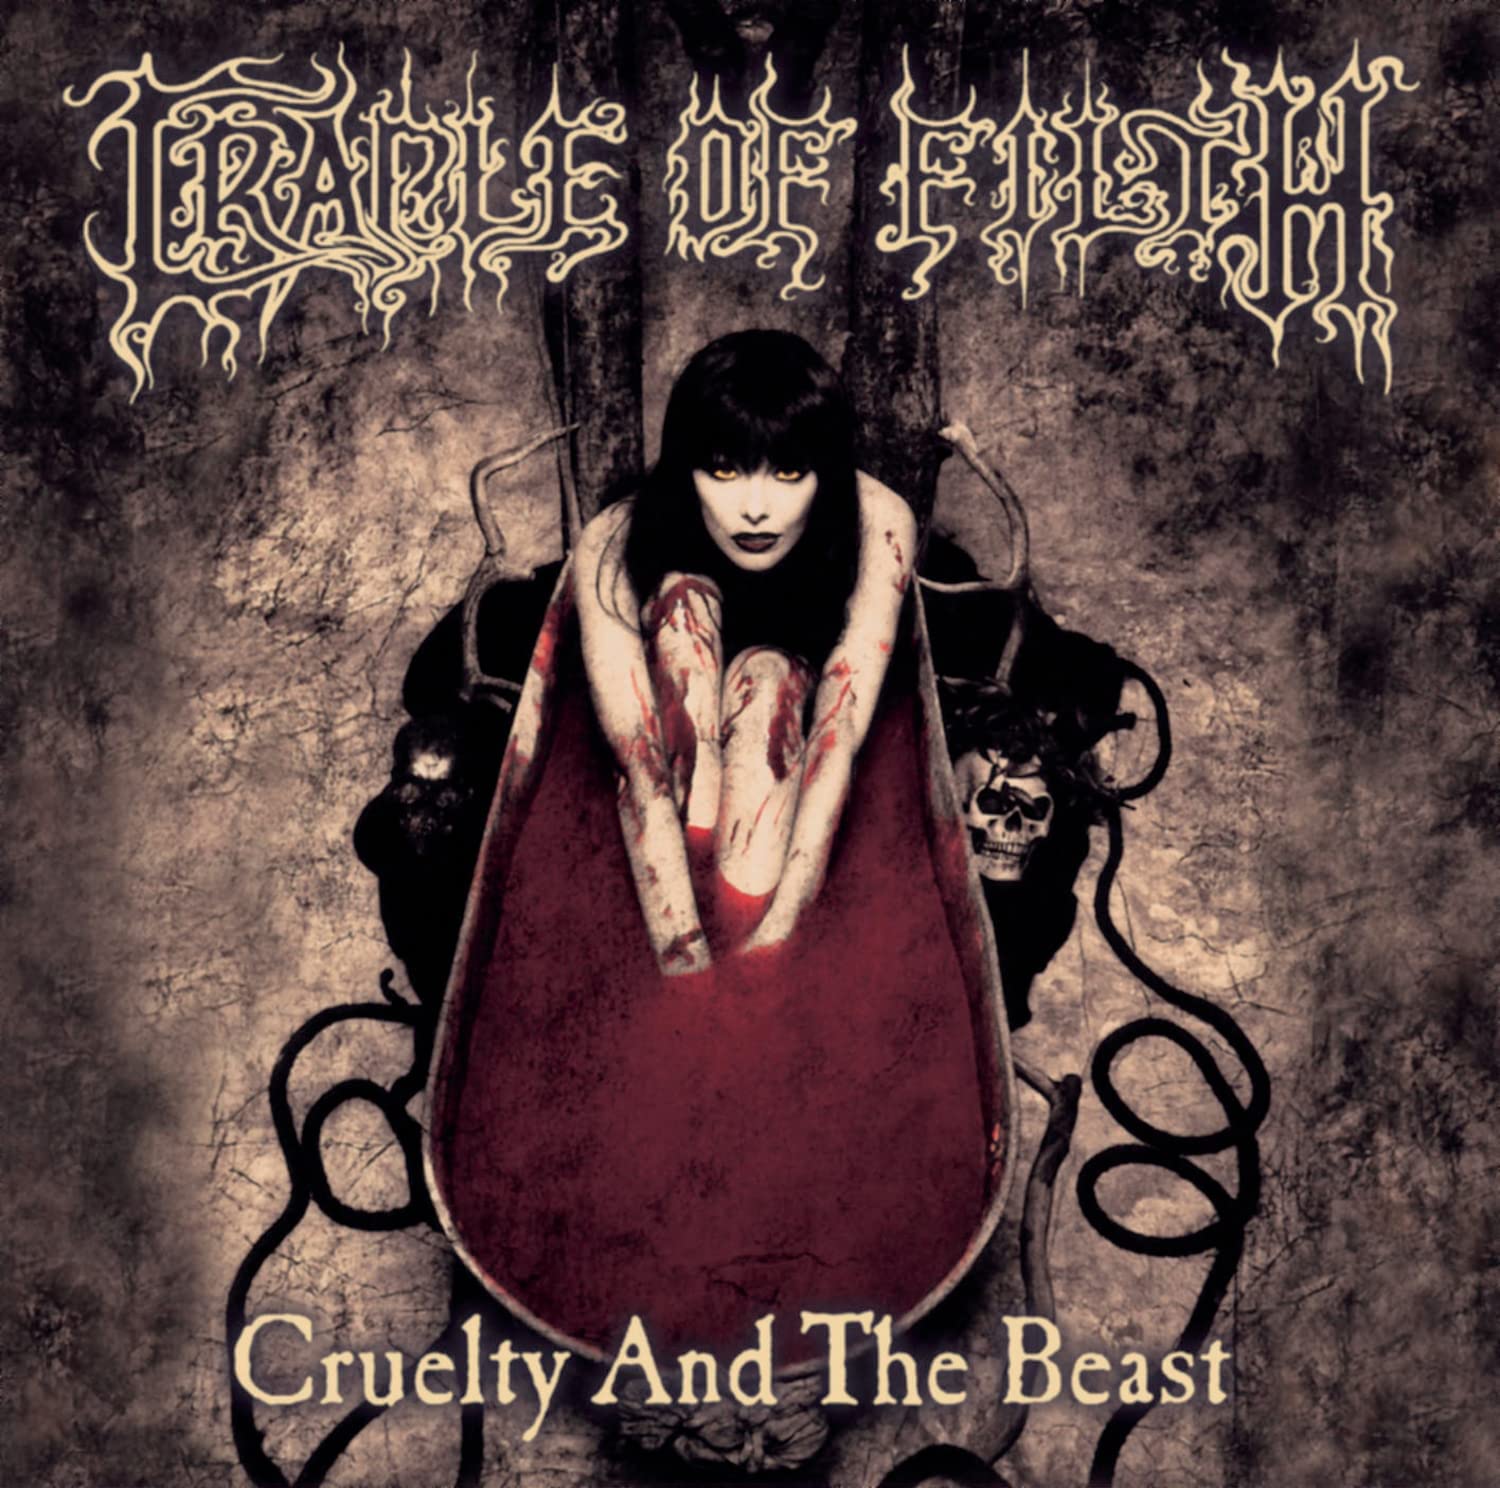 Cradle Of Filth "Cruelty And The Beast" CD